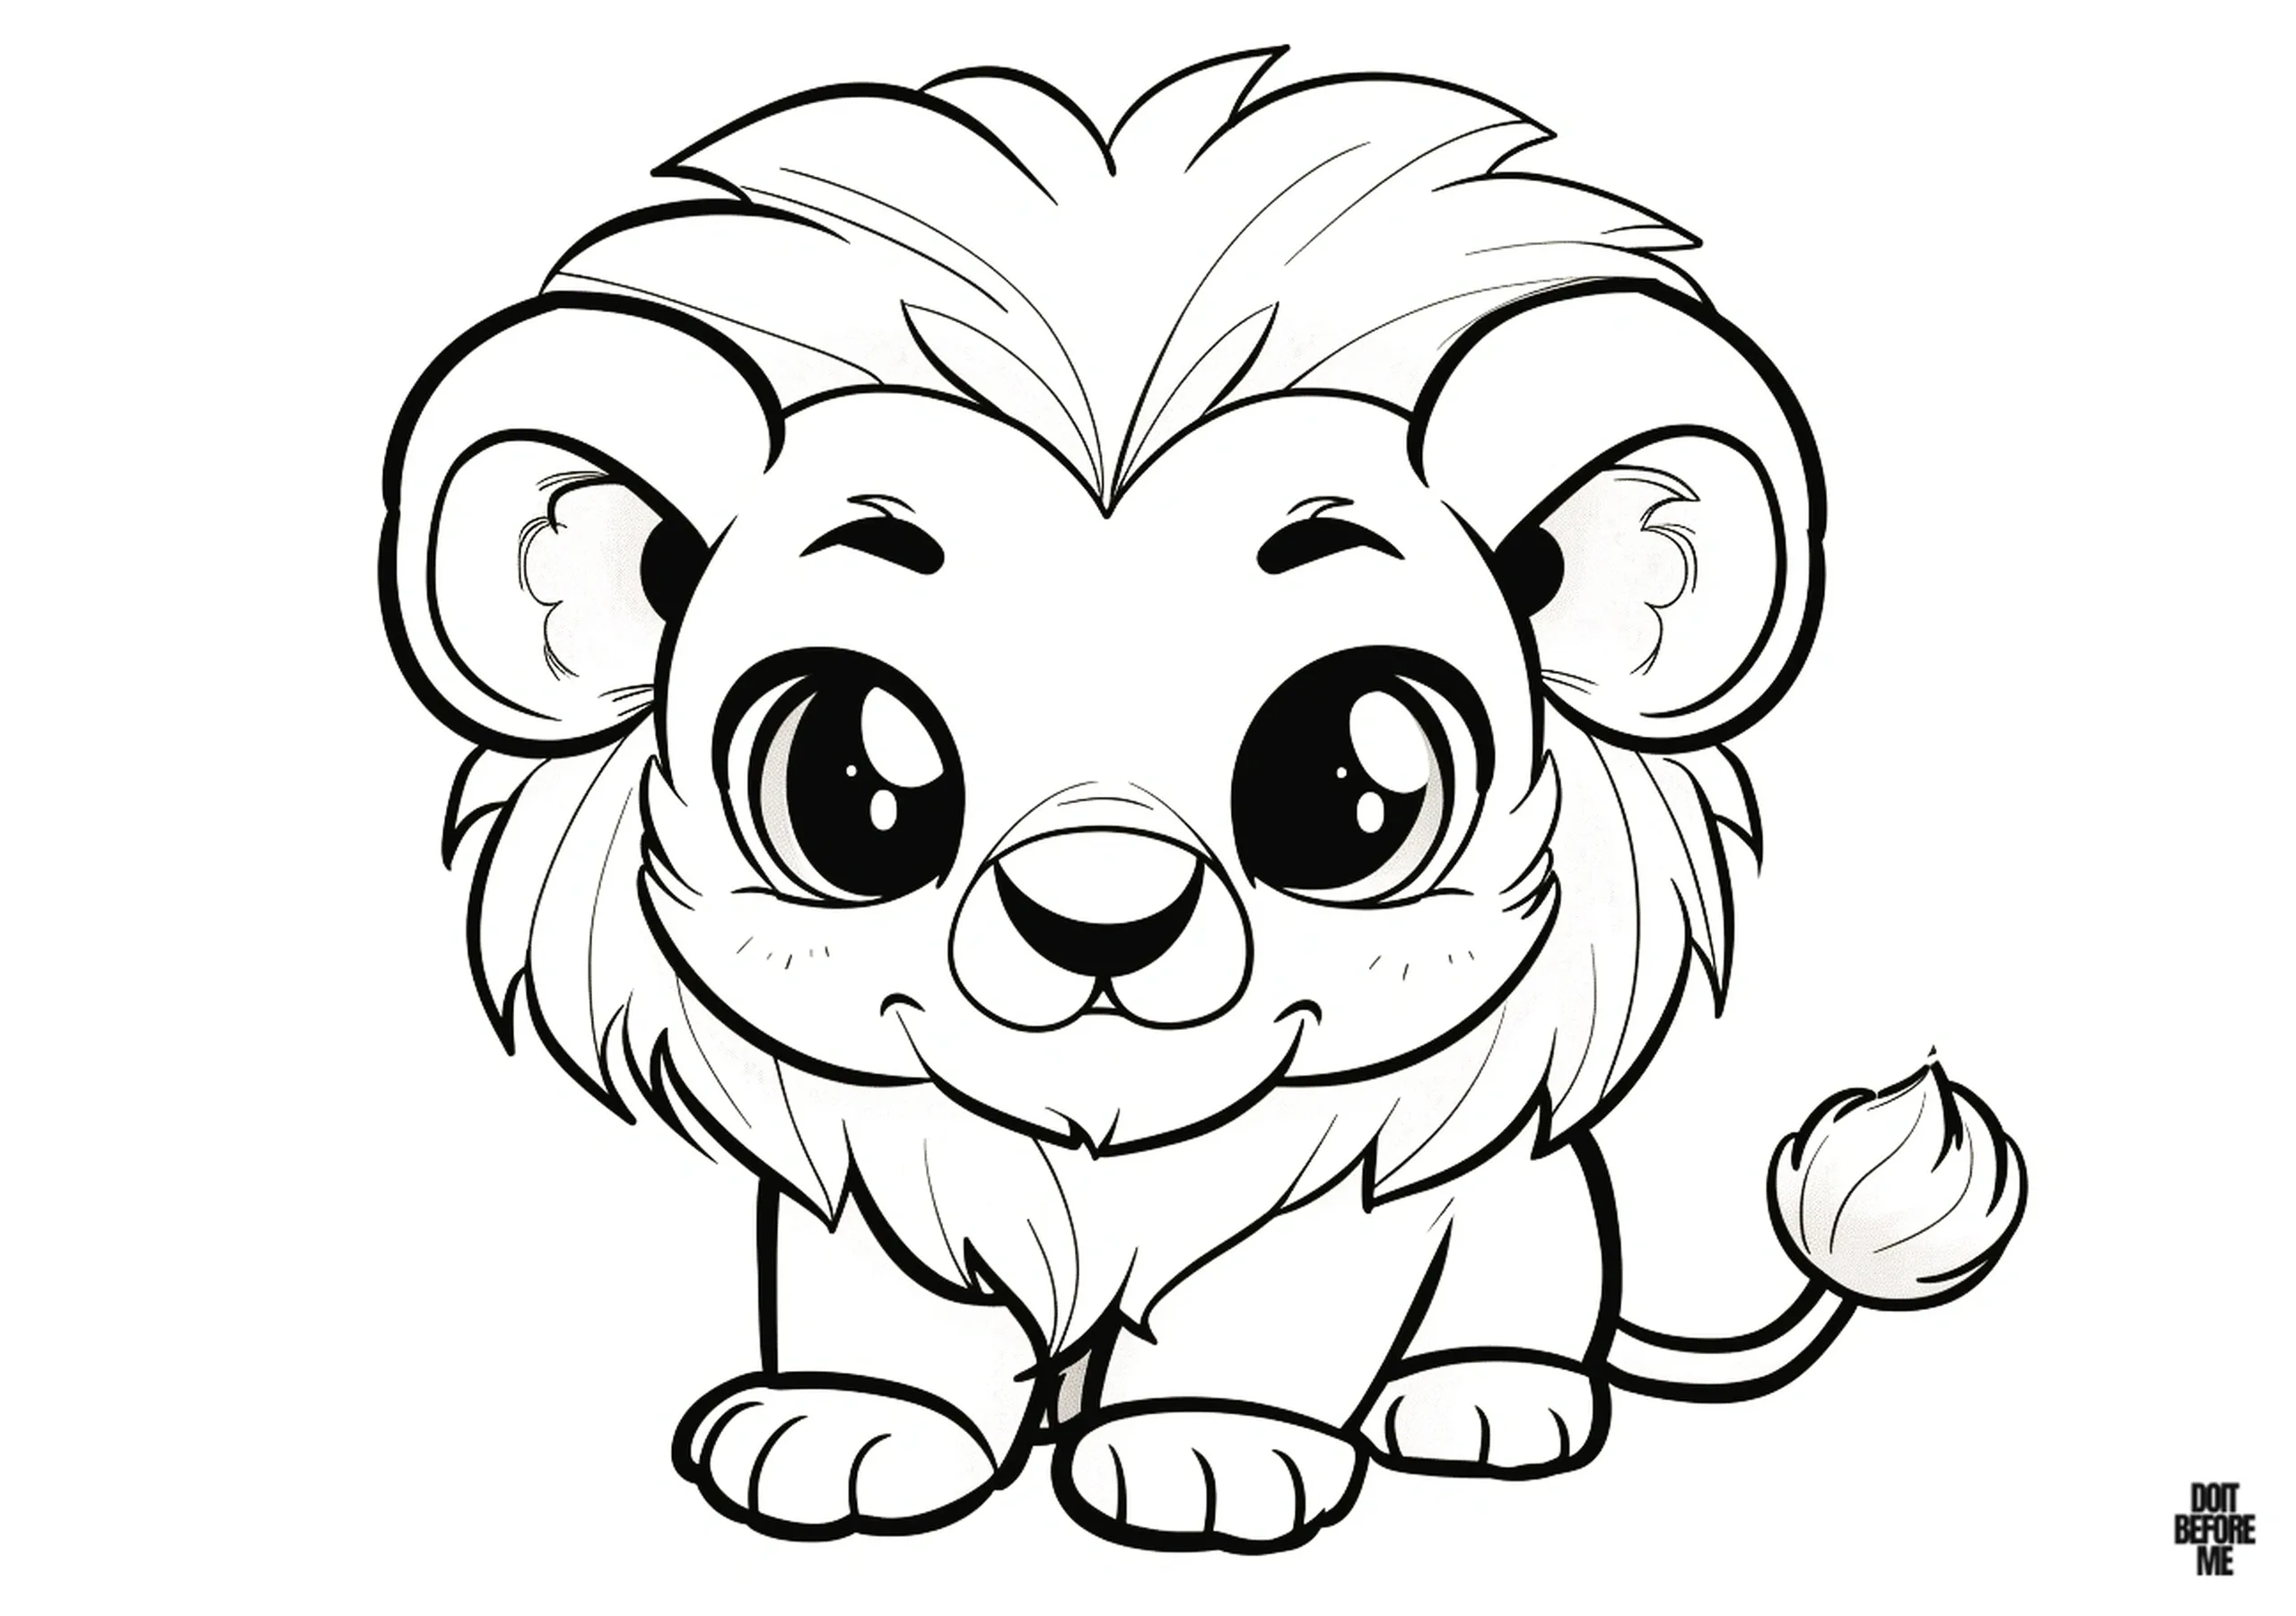 Printable easy coloring sheet featuring a cute male baby lion cub, designed for kids.